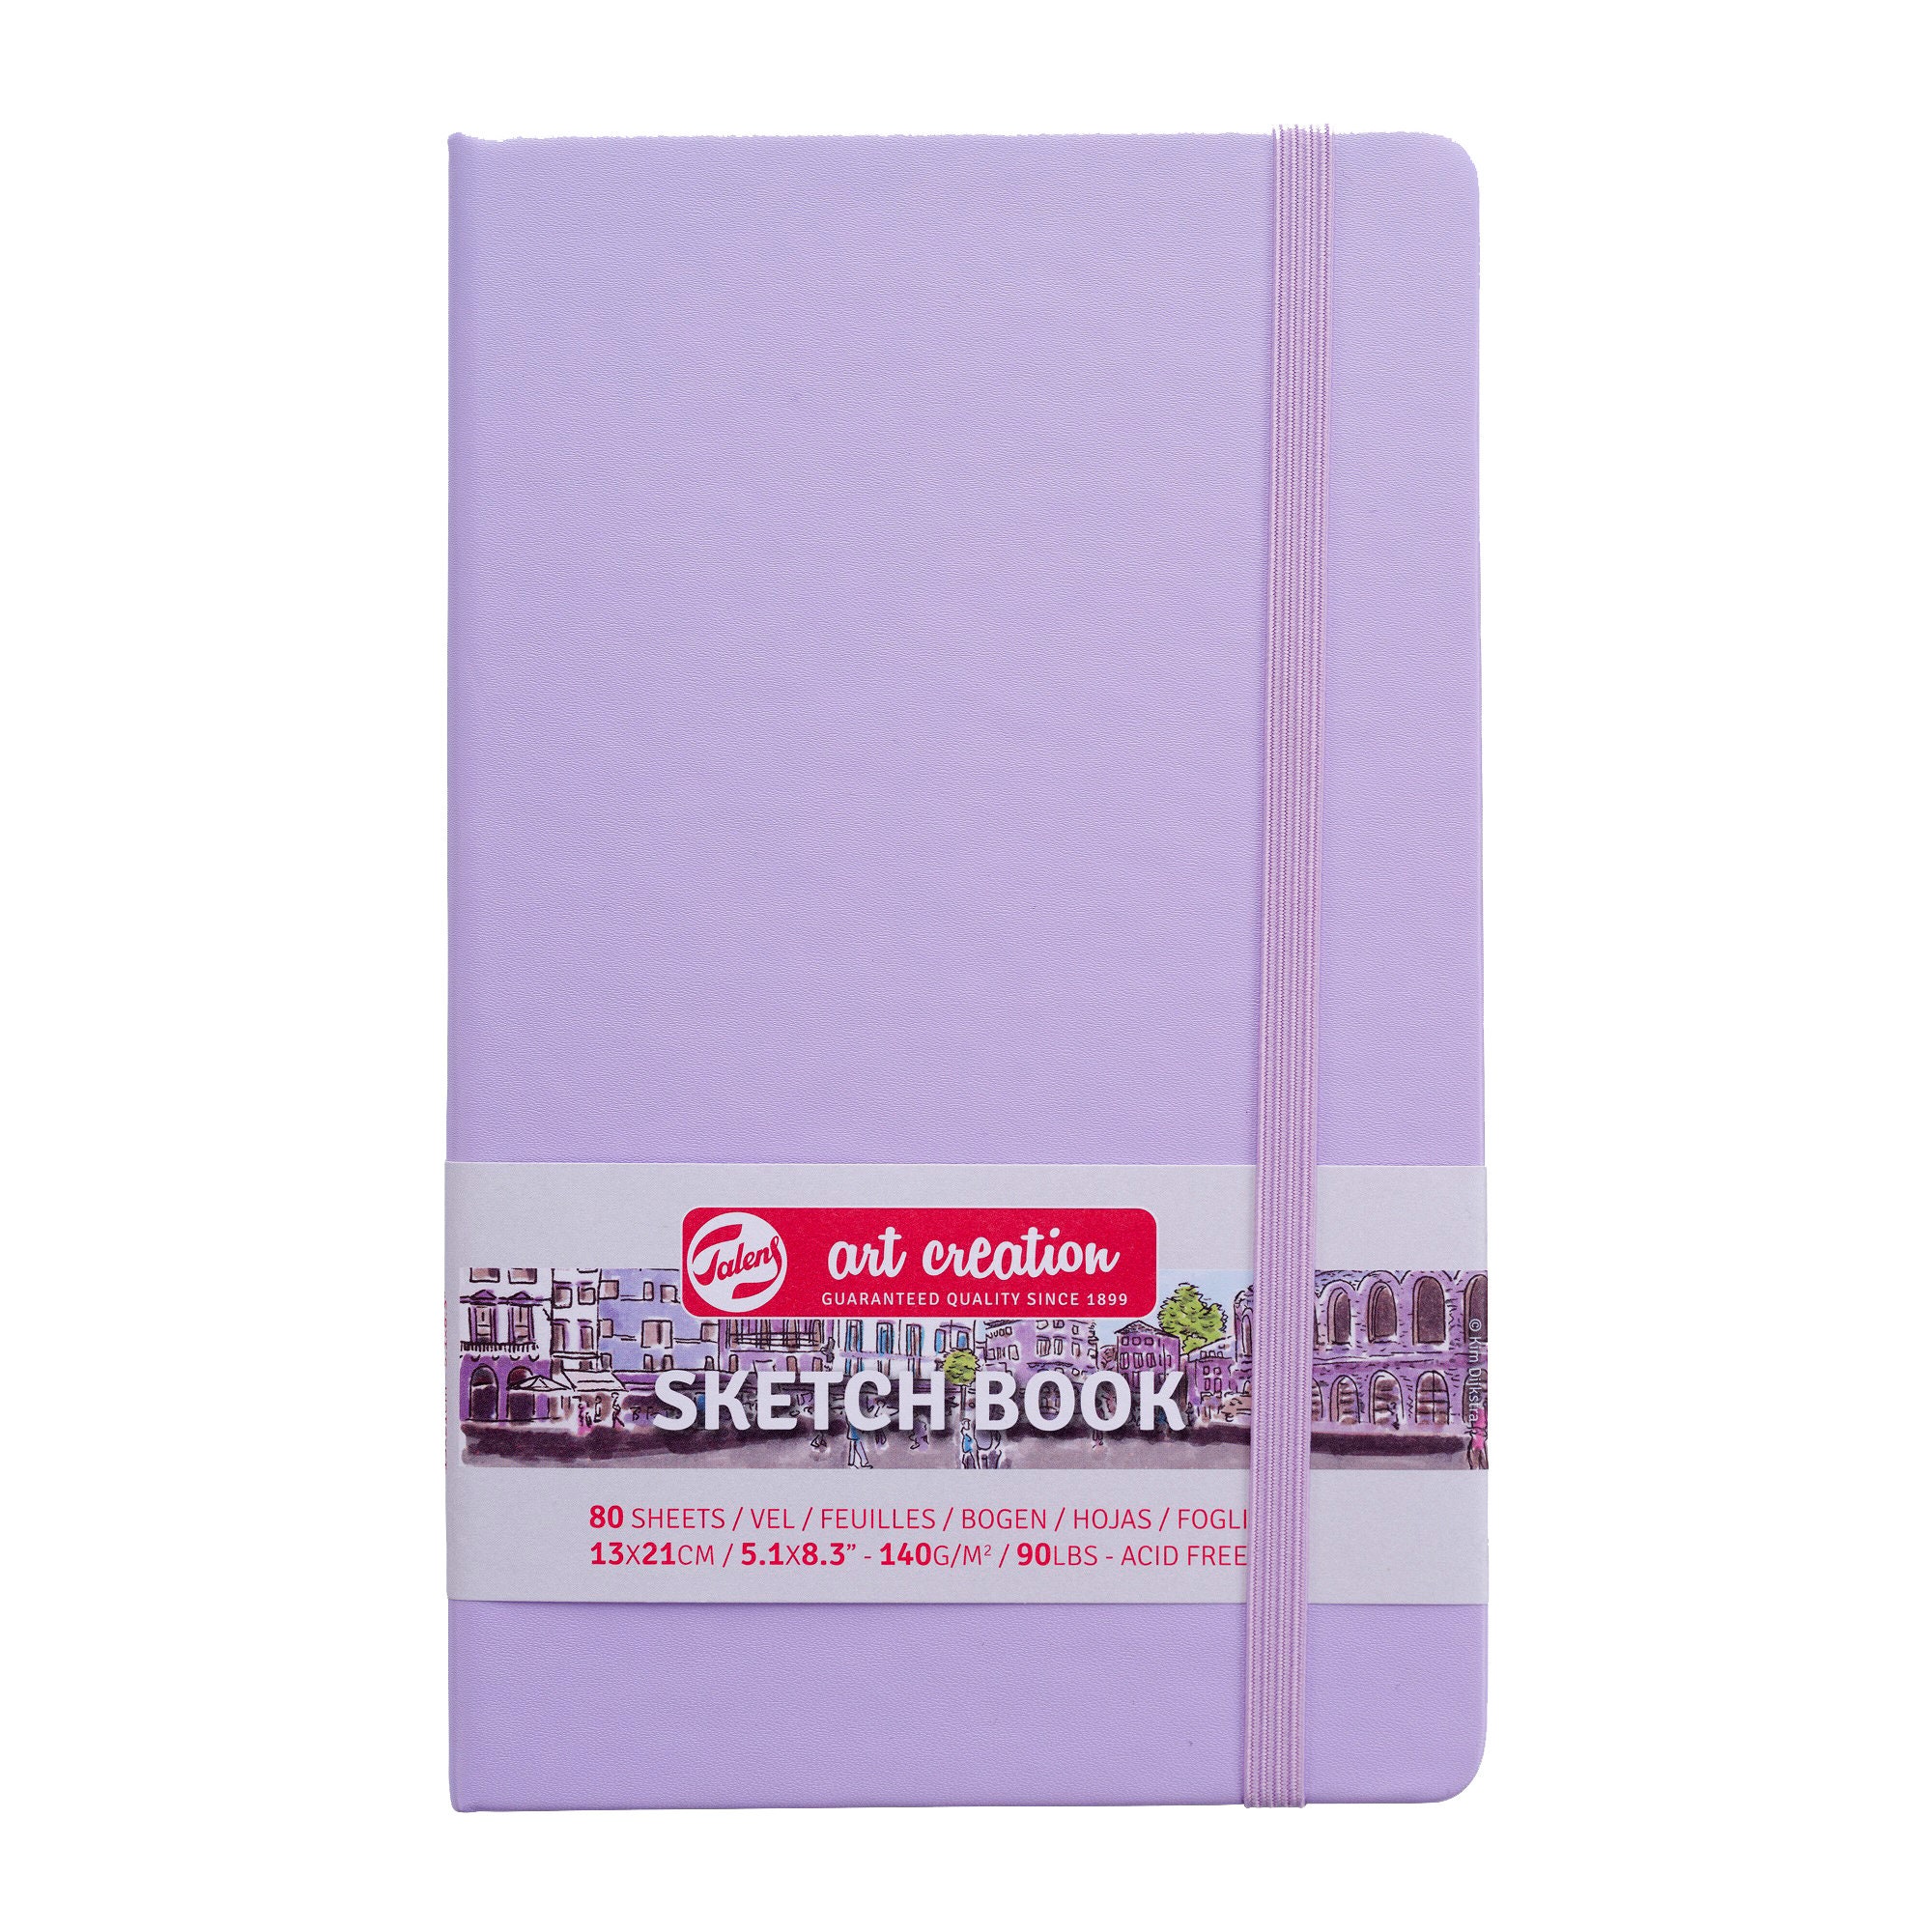 Sakura Sketch / Note Book 80 Pages 140gsm Crème White Paper Various Size  Drawing Sketching Drafting Blank Book Art Stationery 